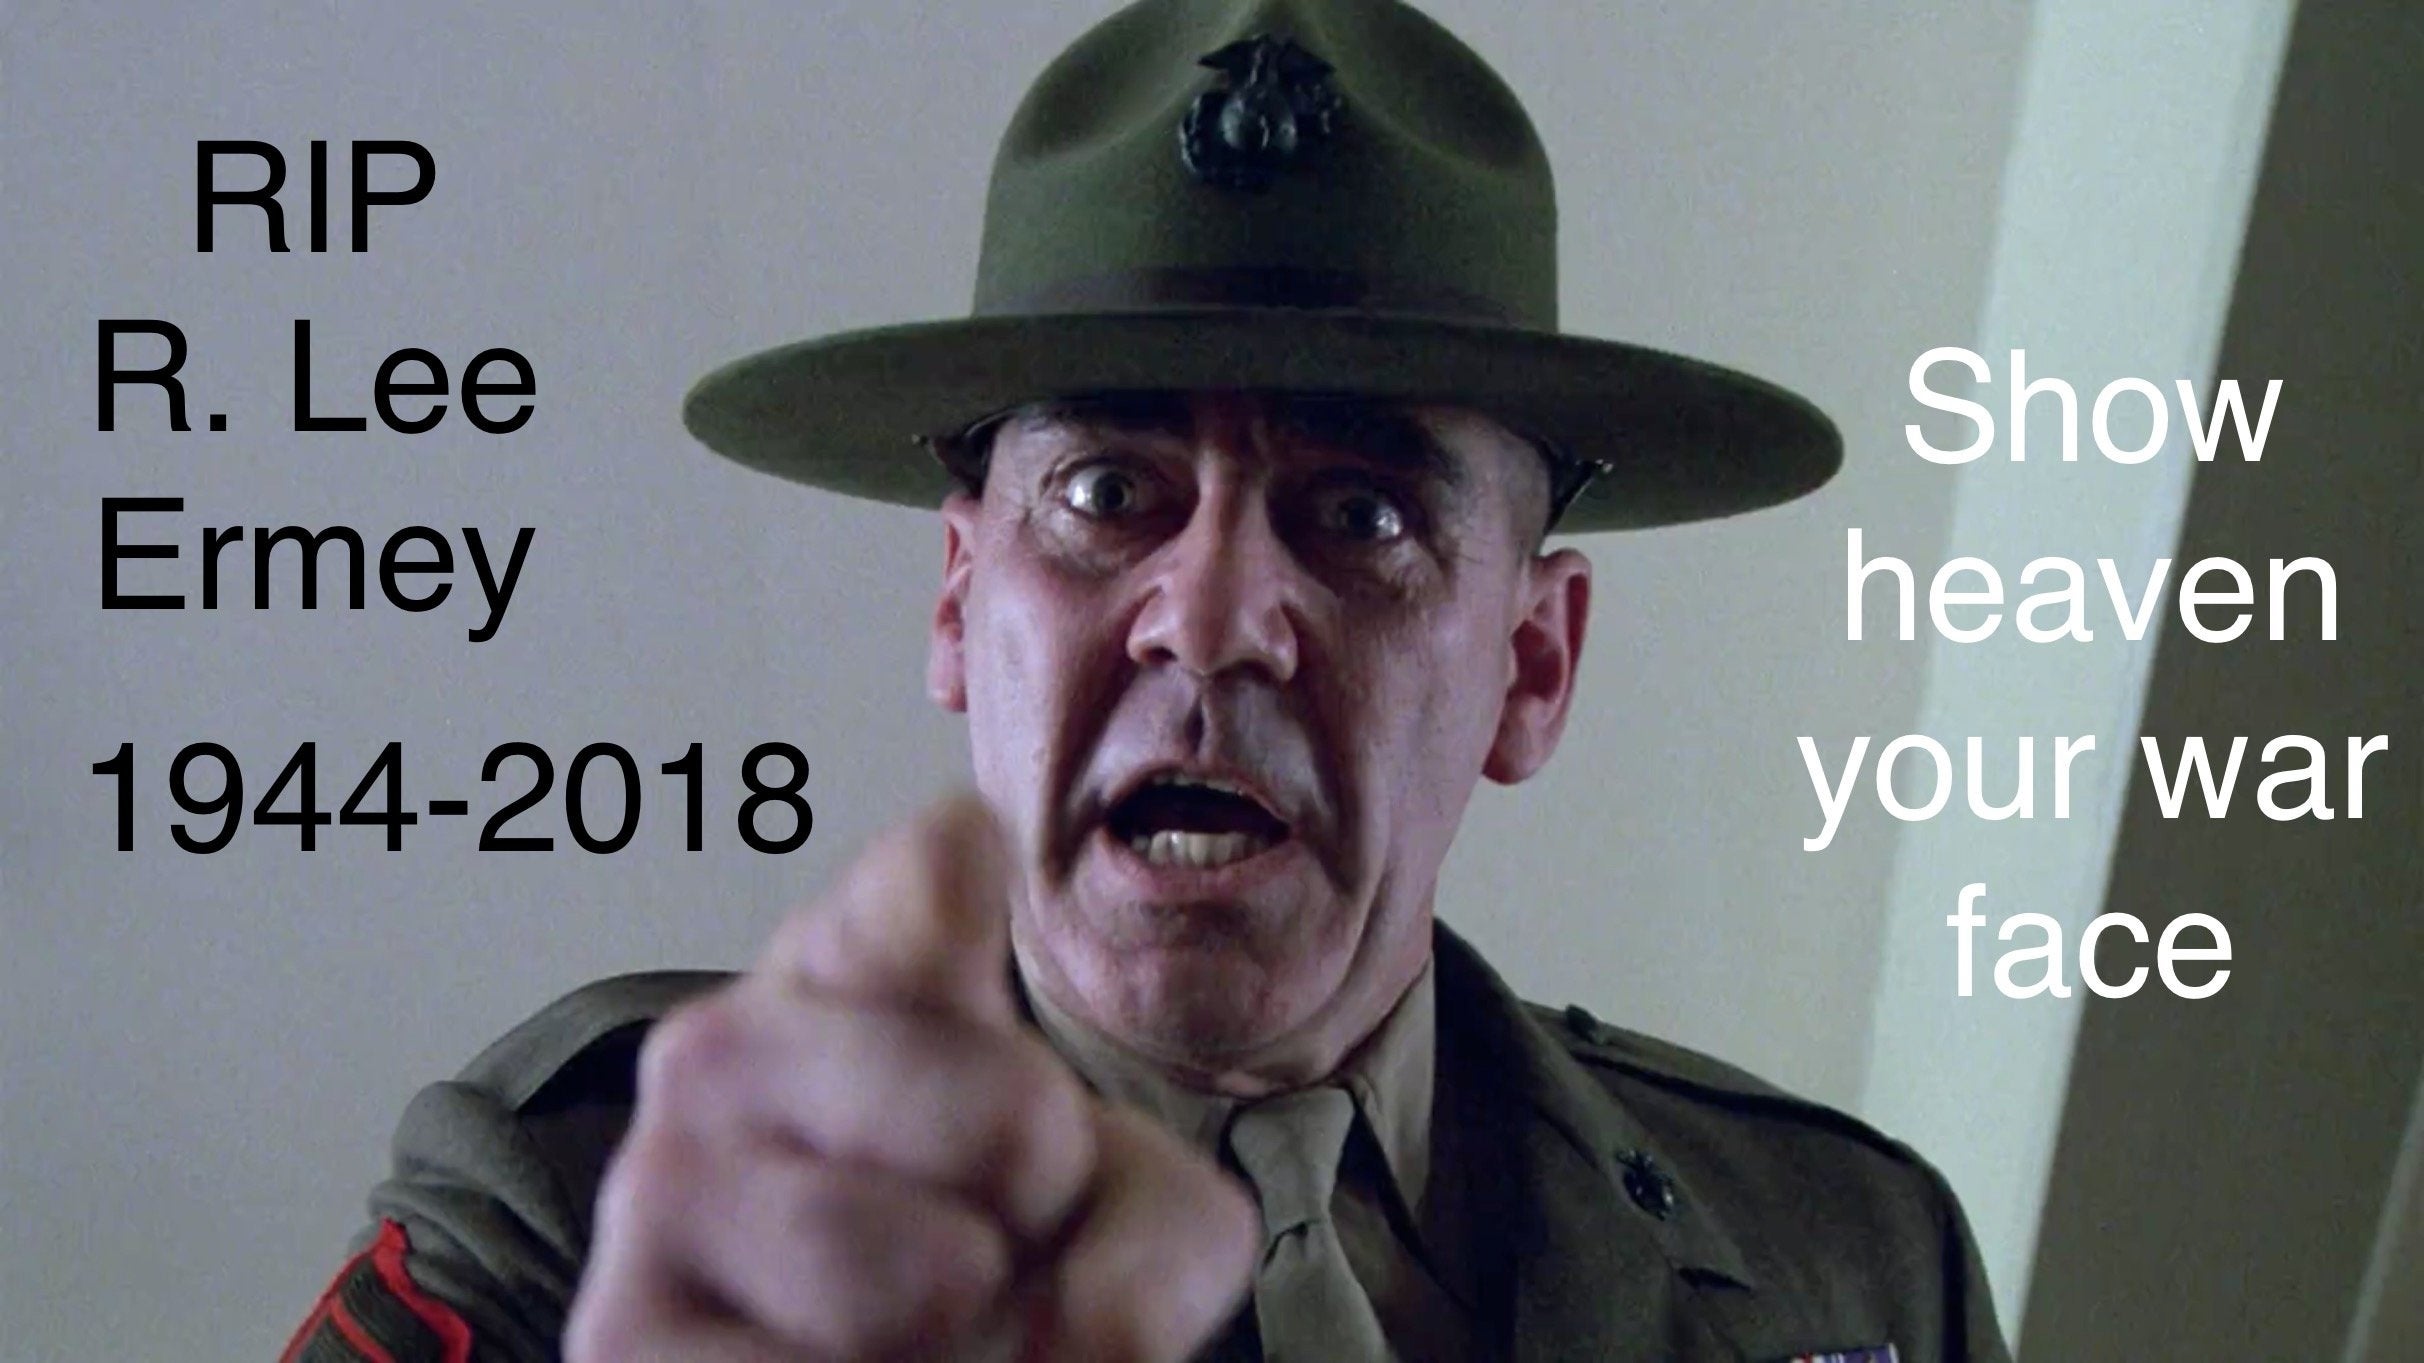 10 of the best ‘Full Metal Jacket’ memes ever made